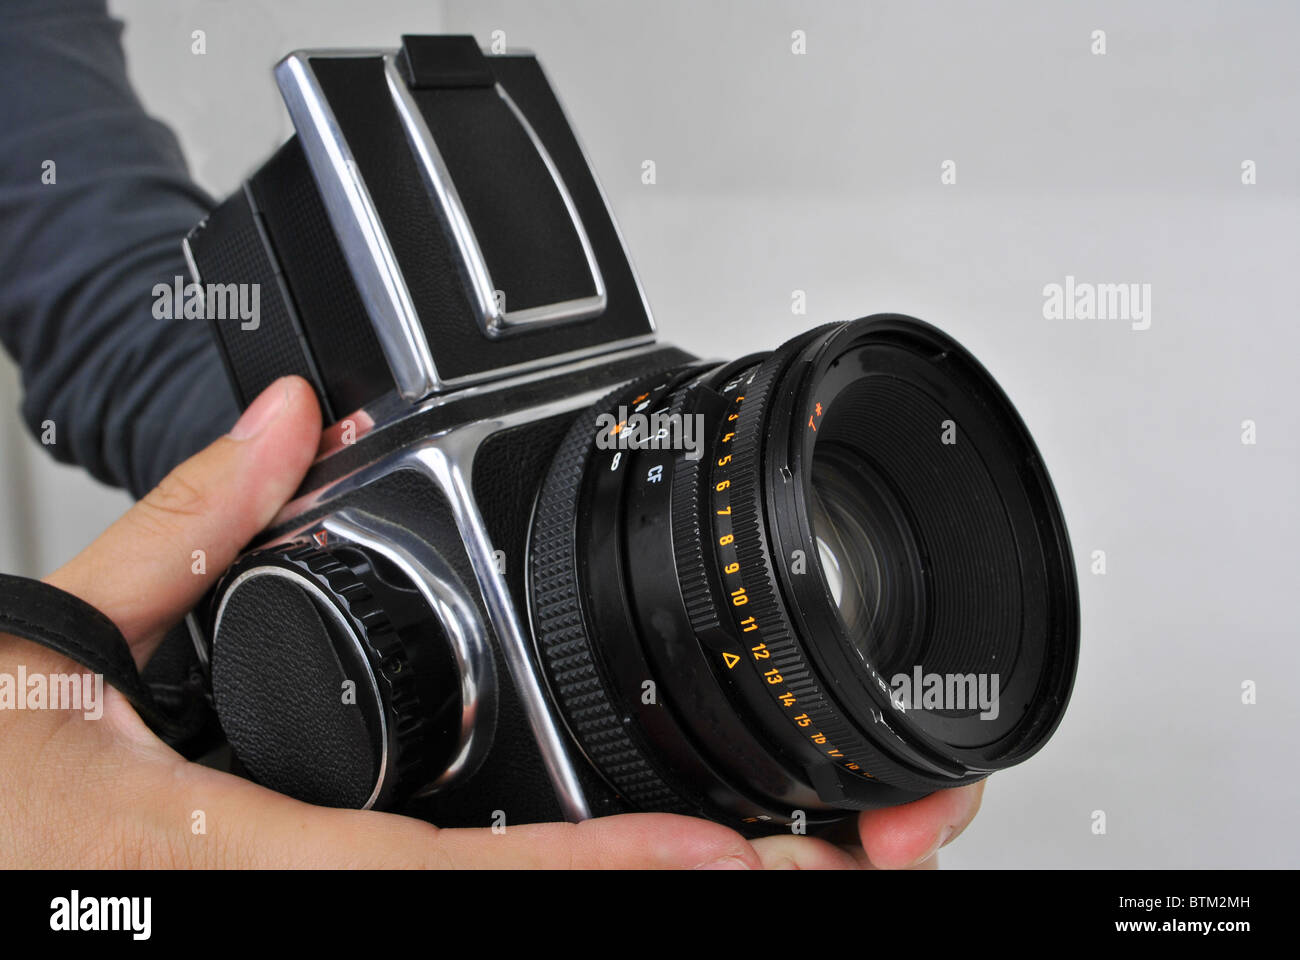 6X6 format camera with lens Stock Photo